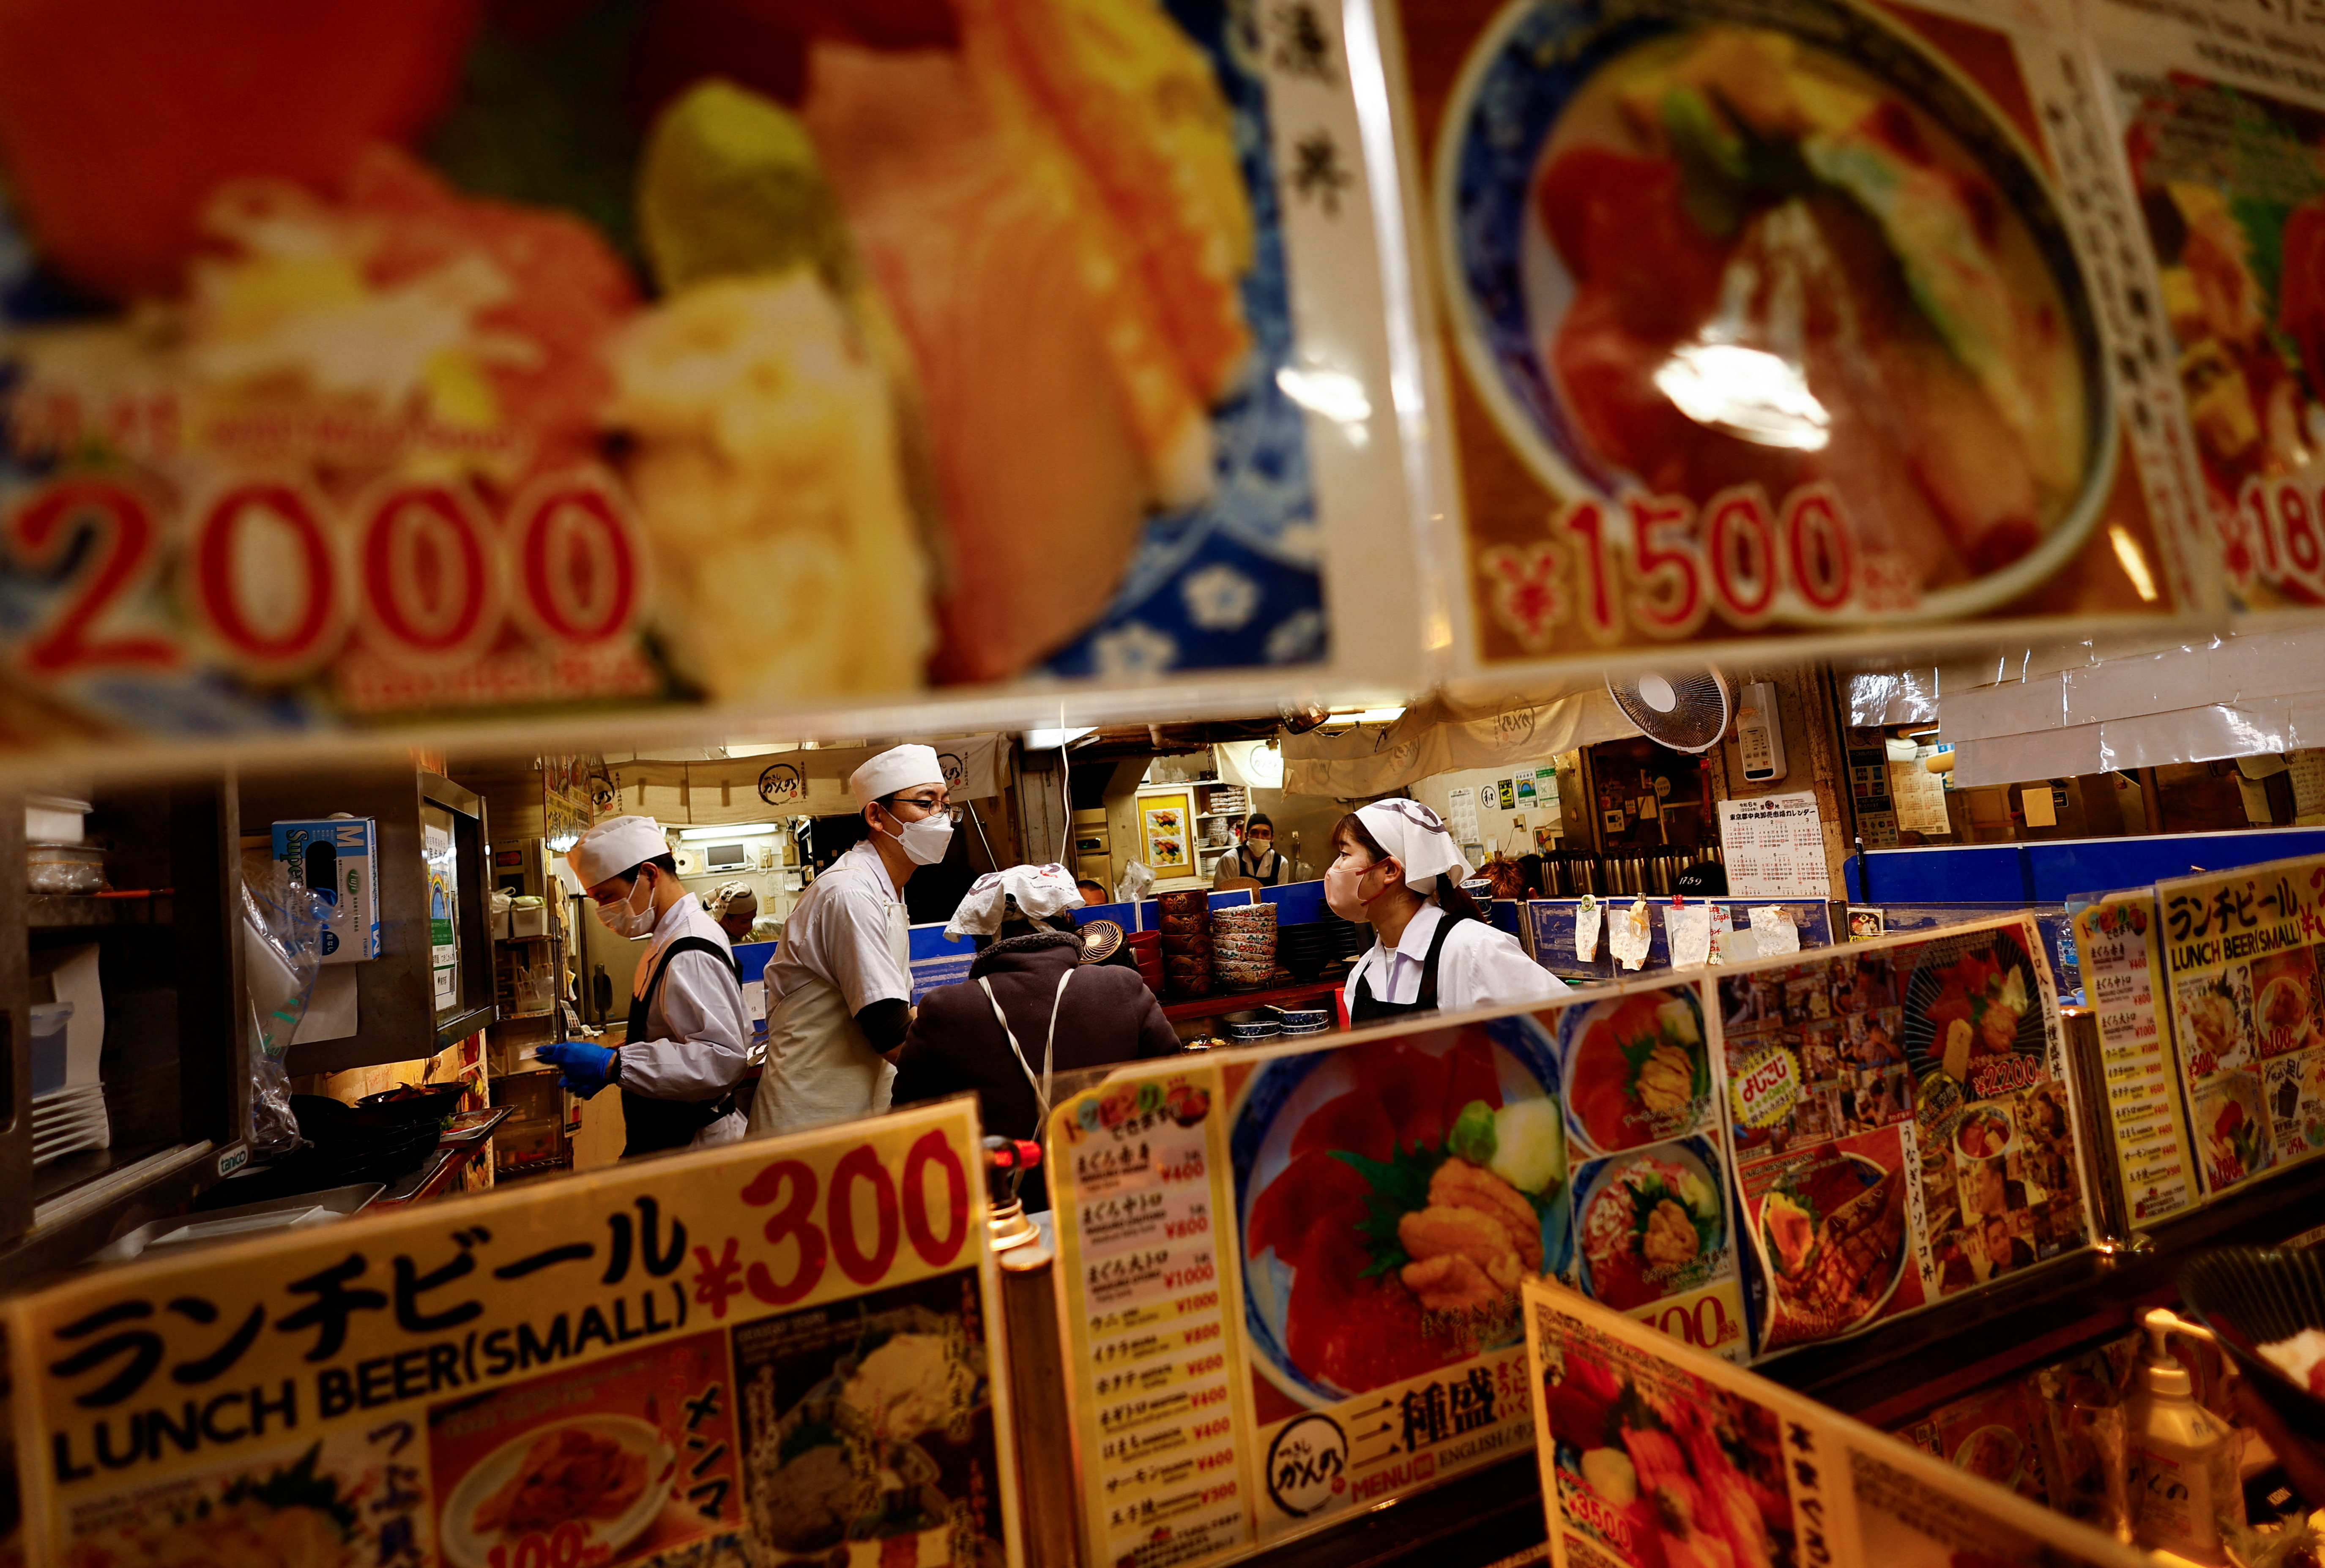 Employees of a seafood restaurant work in their kitchen space at Tsukiji Outer Market in Tokyo